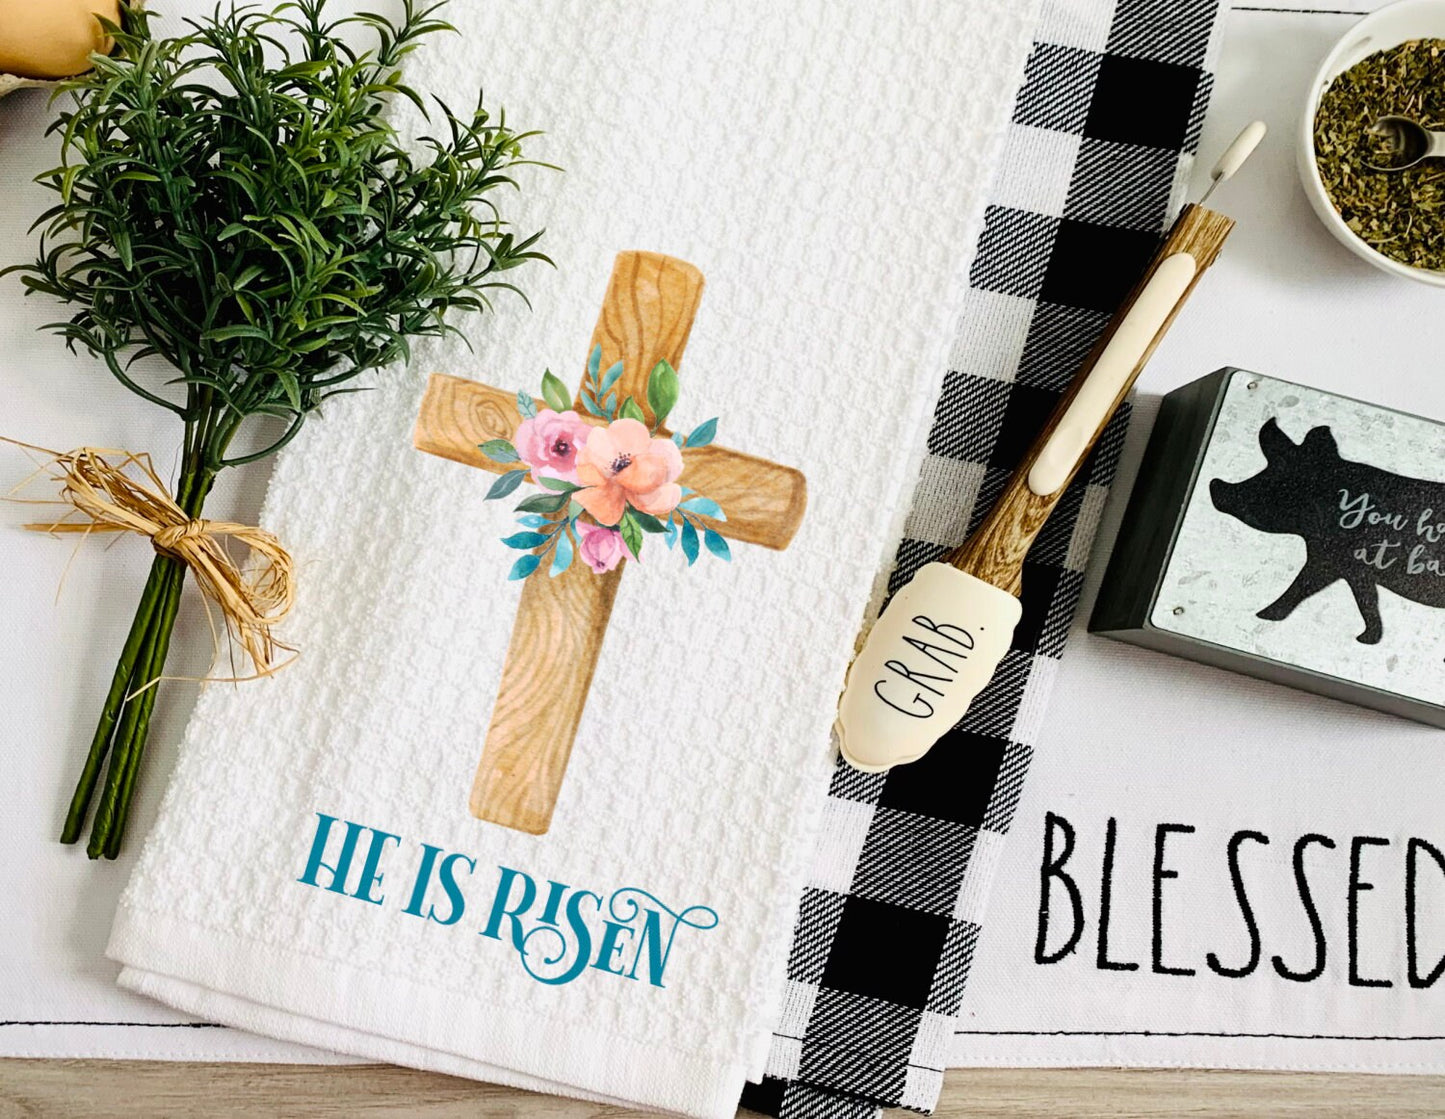 He Is Risen Cross Dish Towel - Floral Cross Christian Tea Towel Kitchen - New Home Gift, Housewarming Easter Decorations house Decor Towel